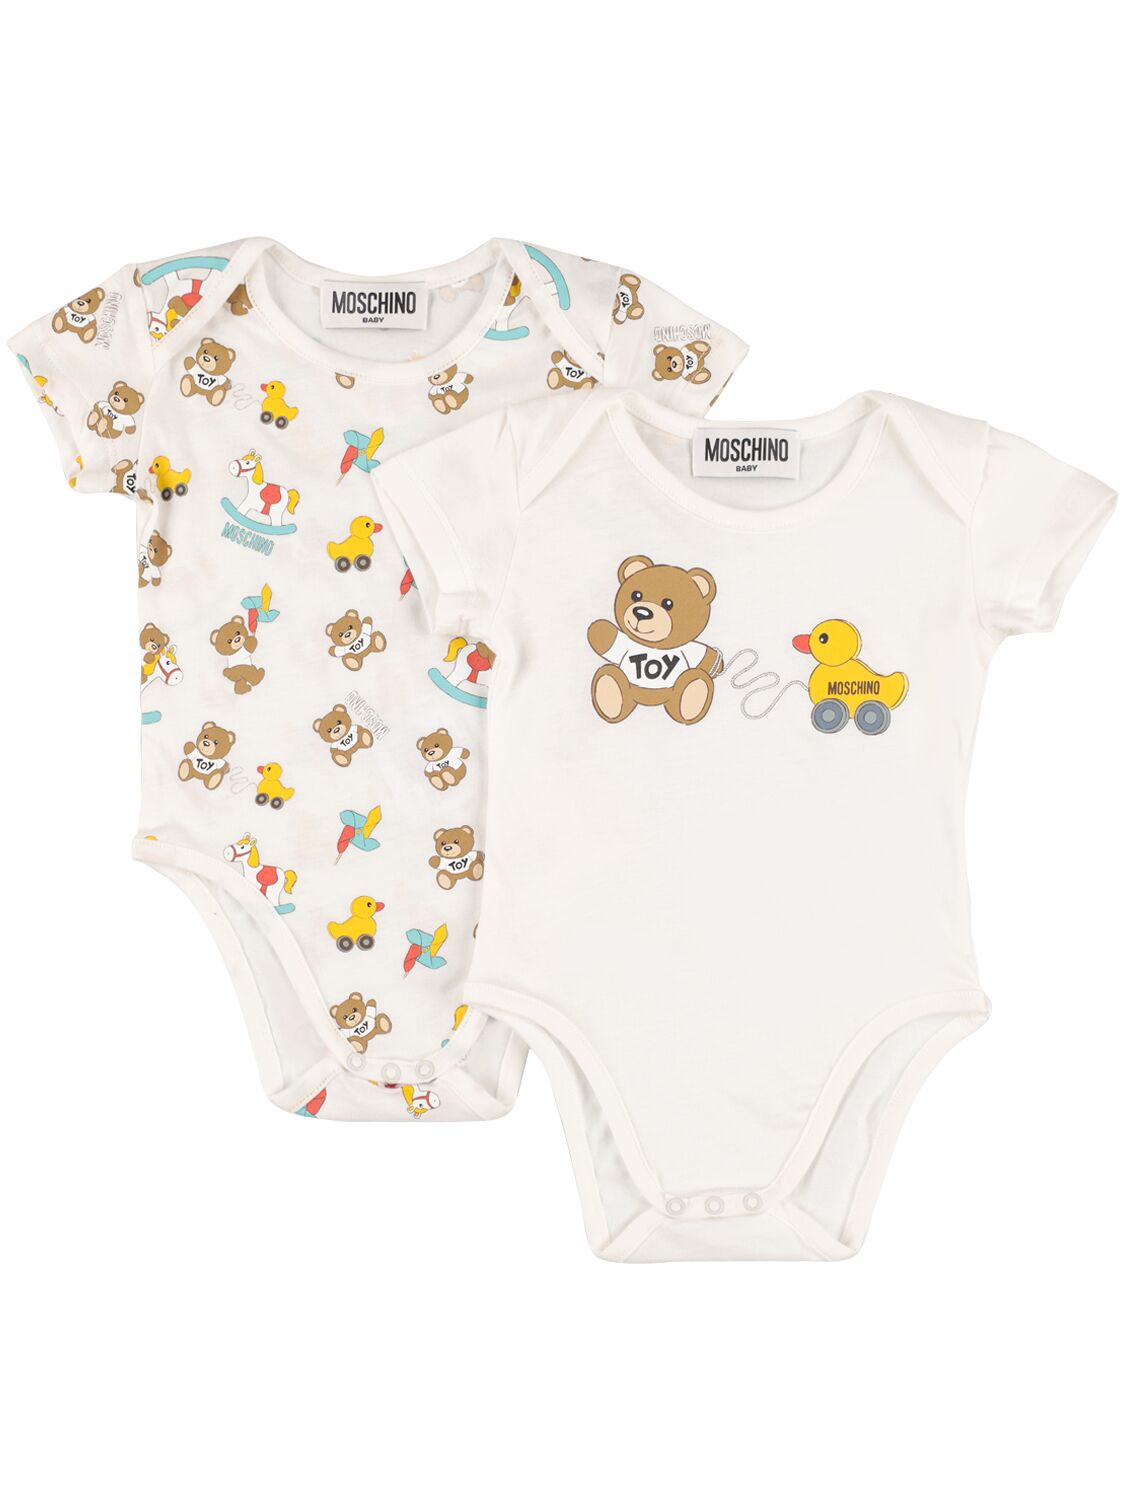 Moschino Babies' Set Of 2 Bodysuits In Off-white